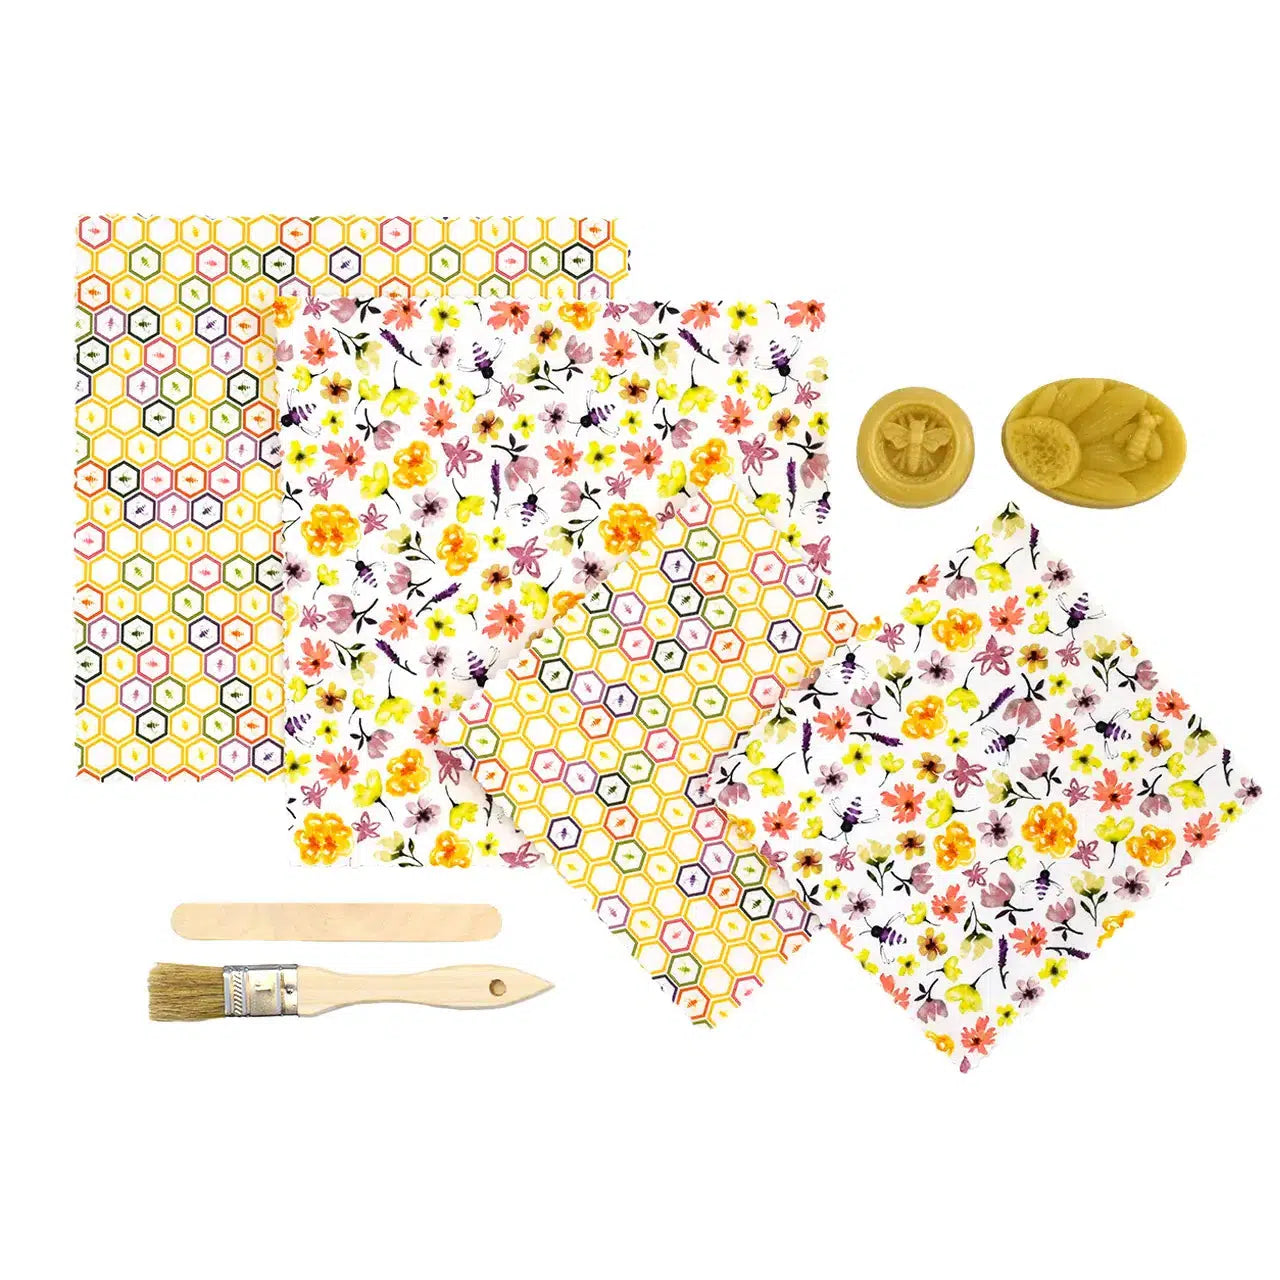 DIY Beeswax Food Wrap Kit Kitchen Made by Bees Prettycleanshop